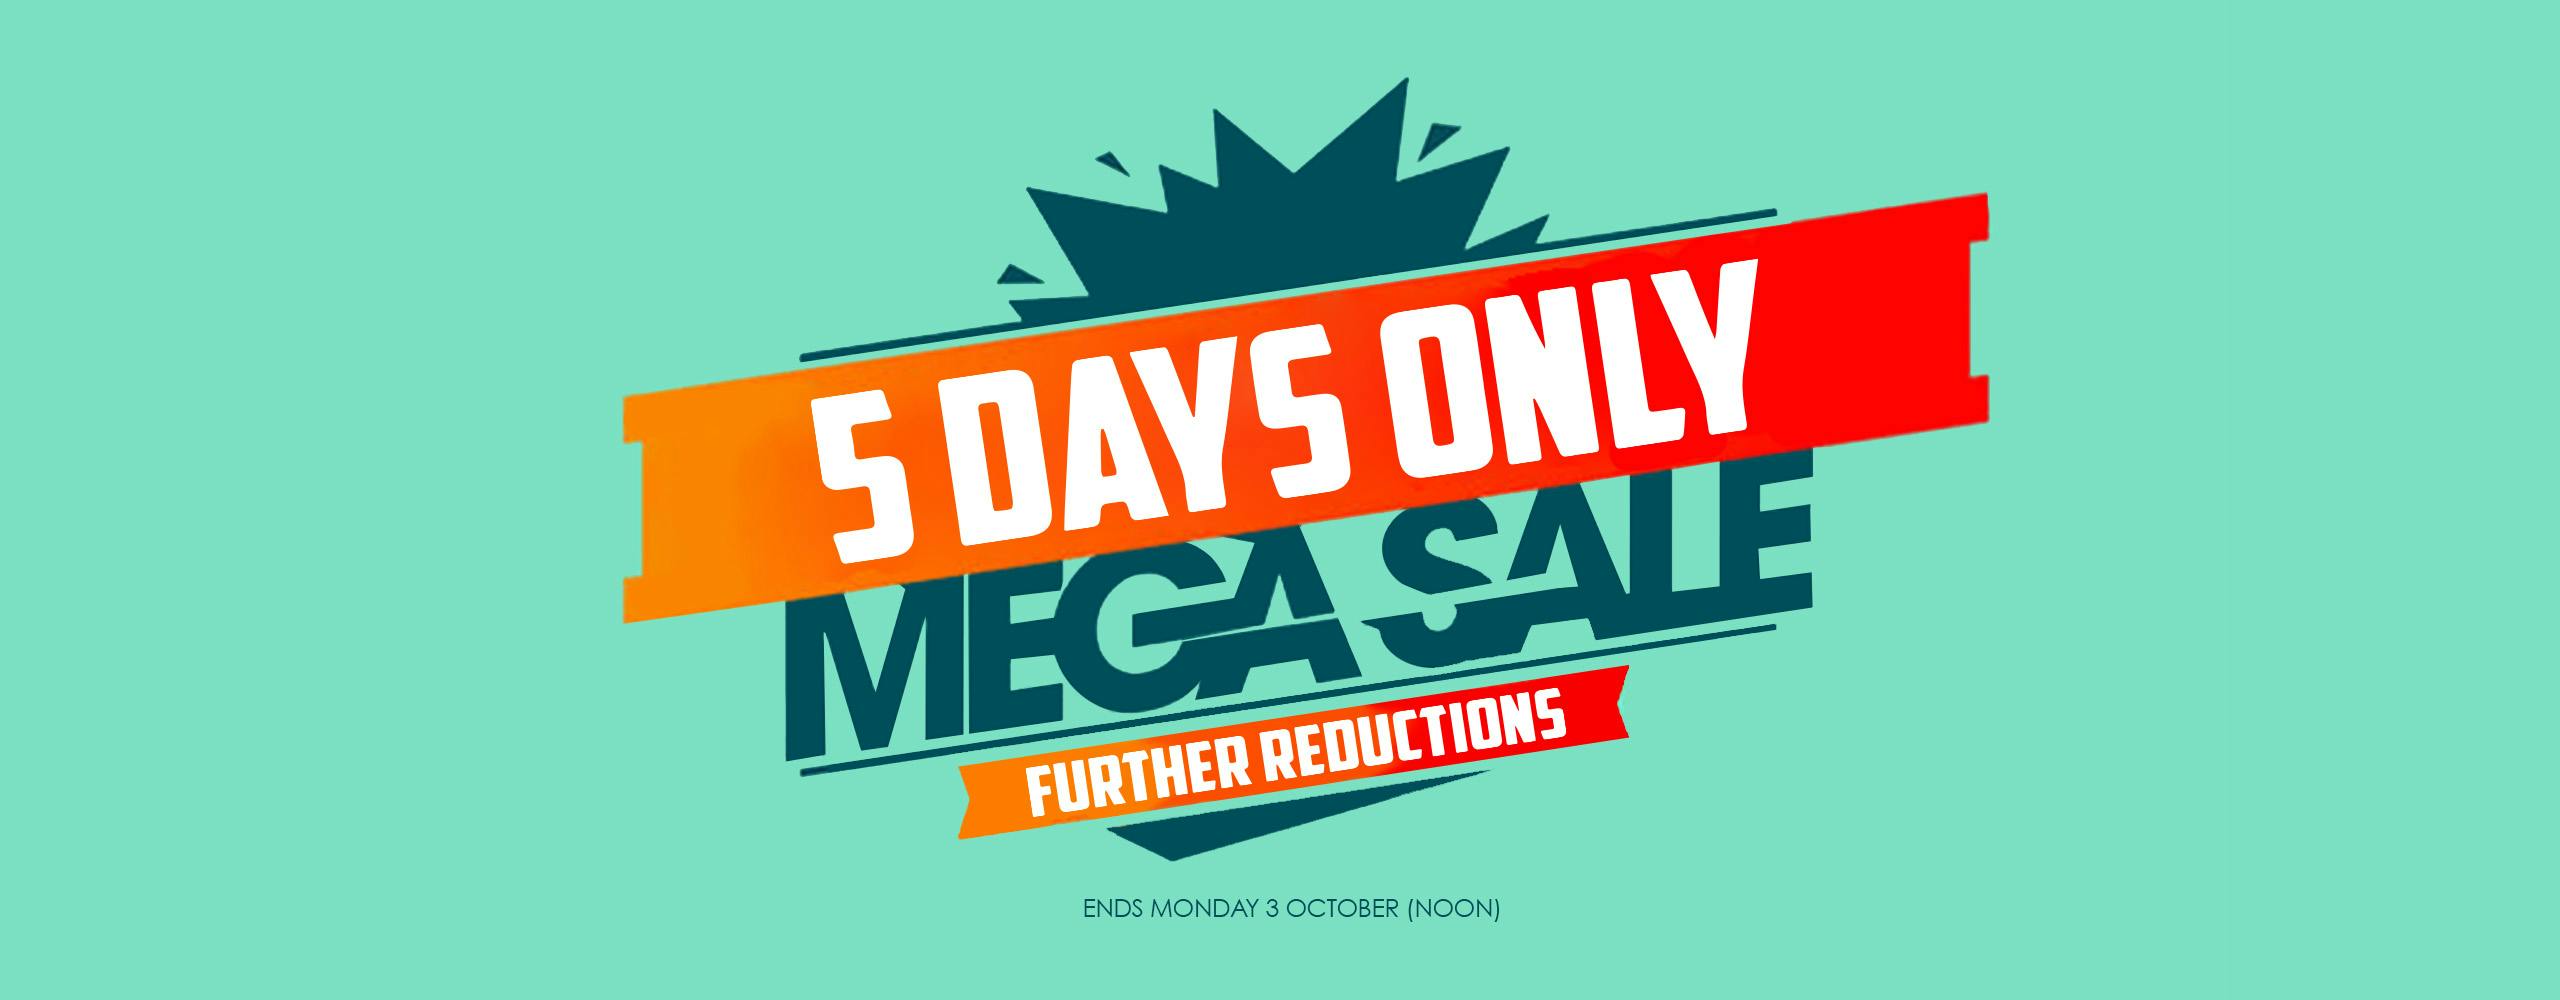 Further sale reductions at Blitz for 5 days only!